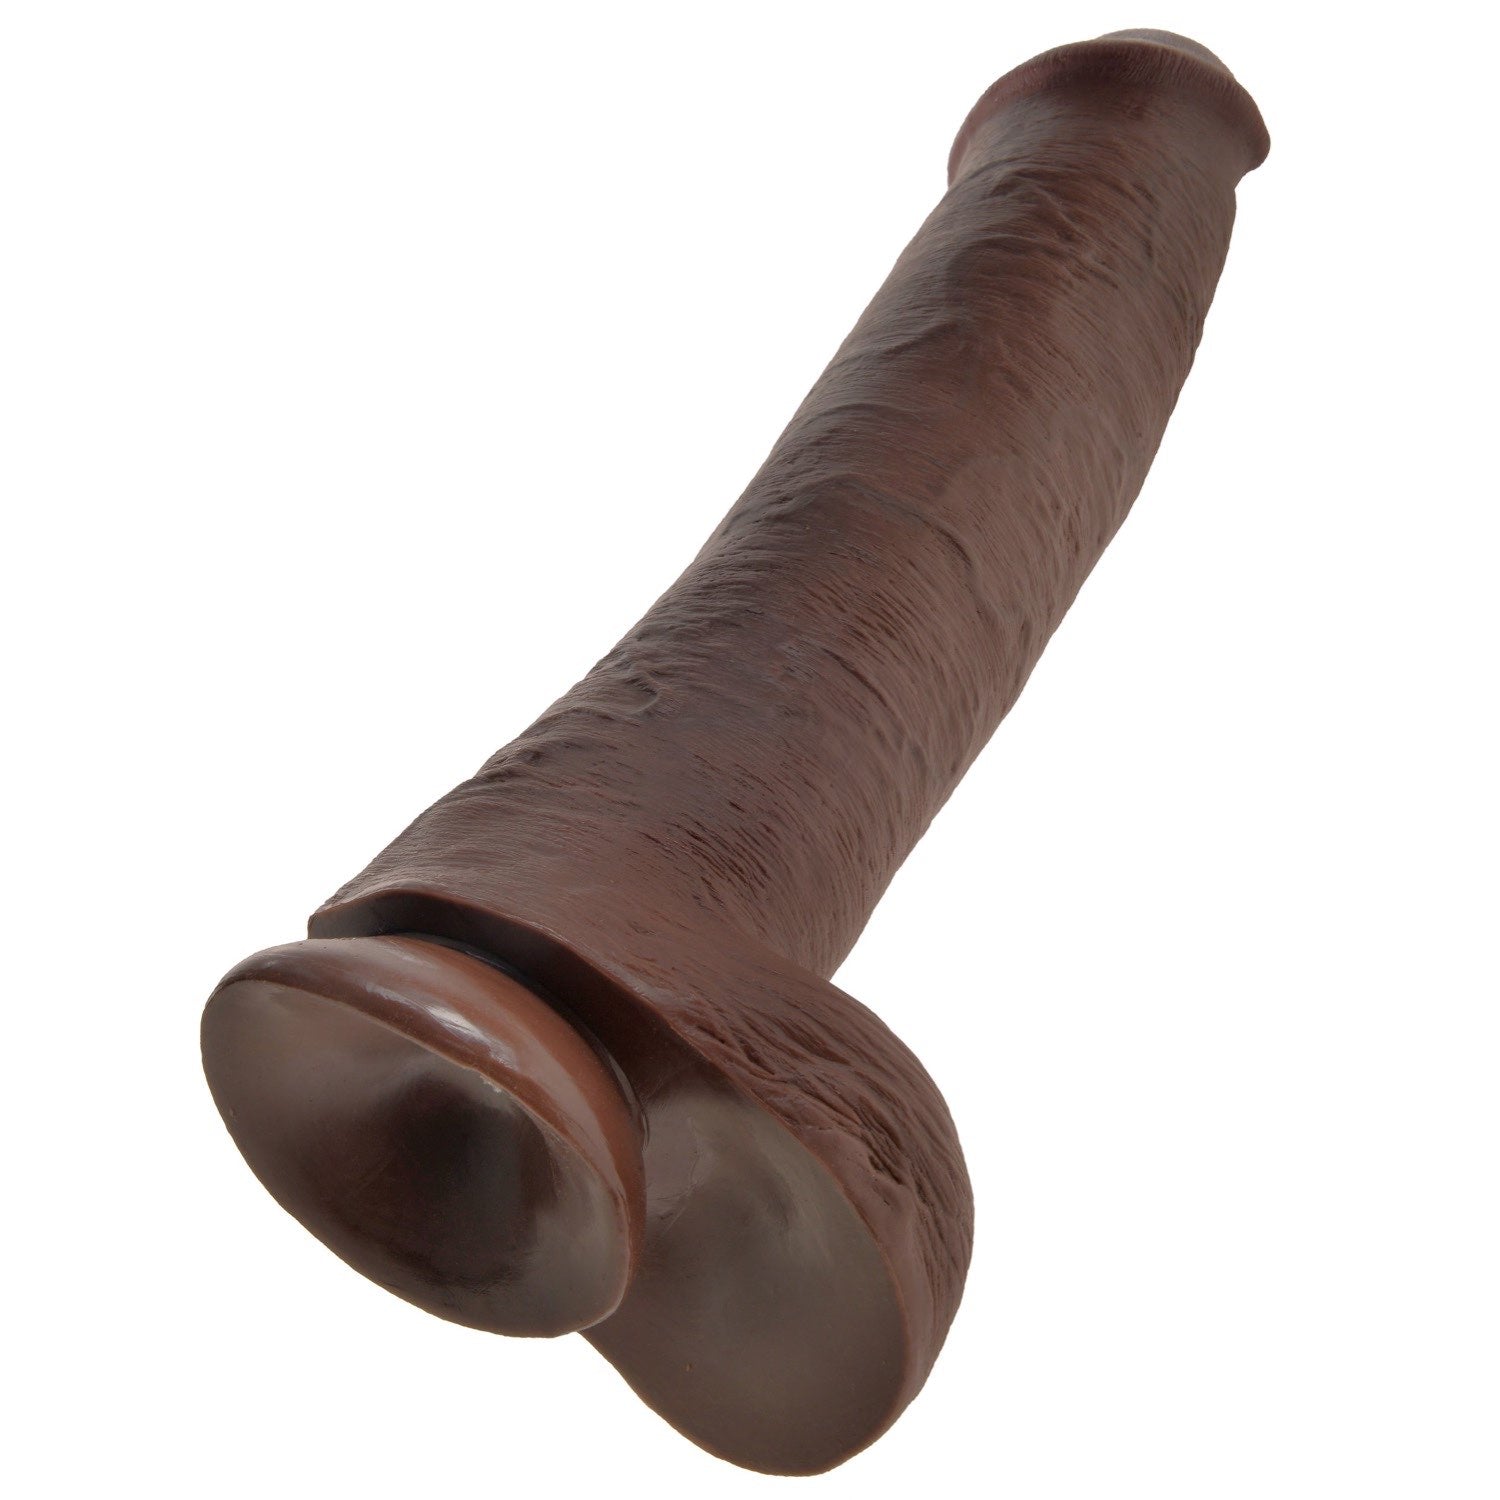 King Cock 15IN Cock wtih Balls - Brown by Pipedream